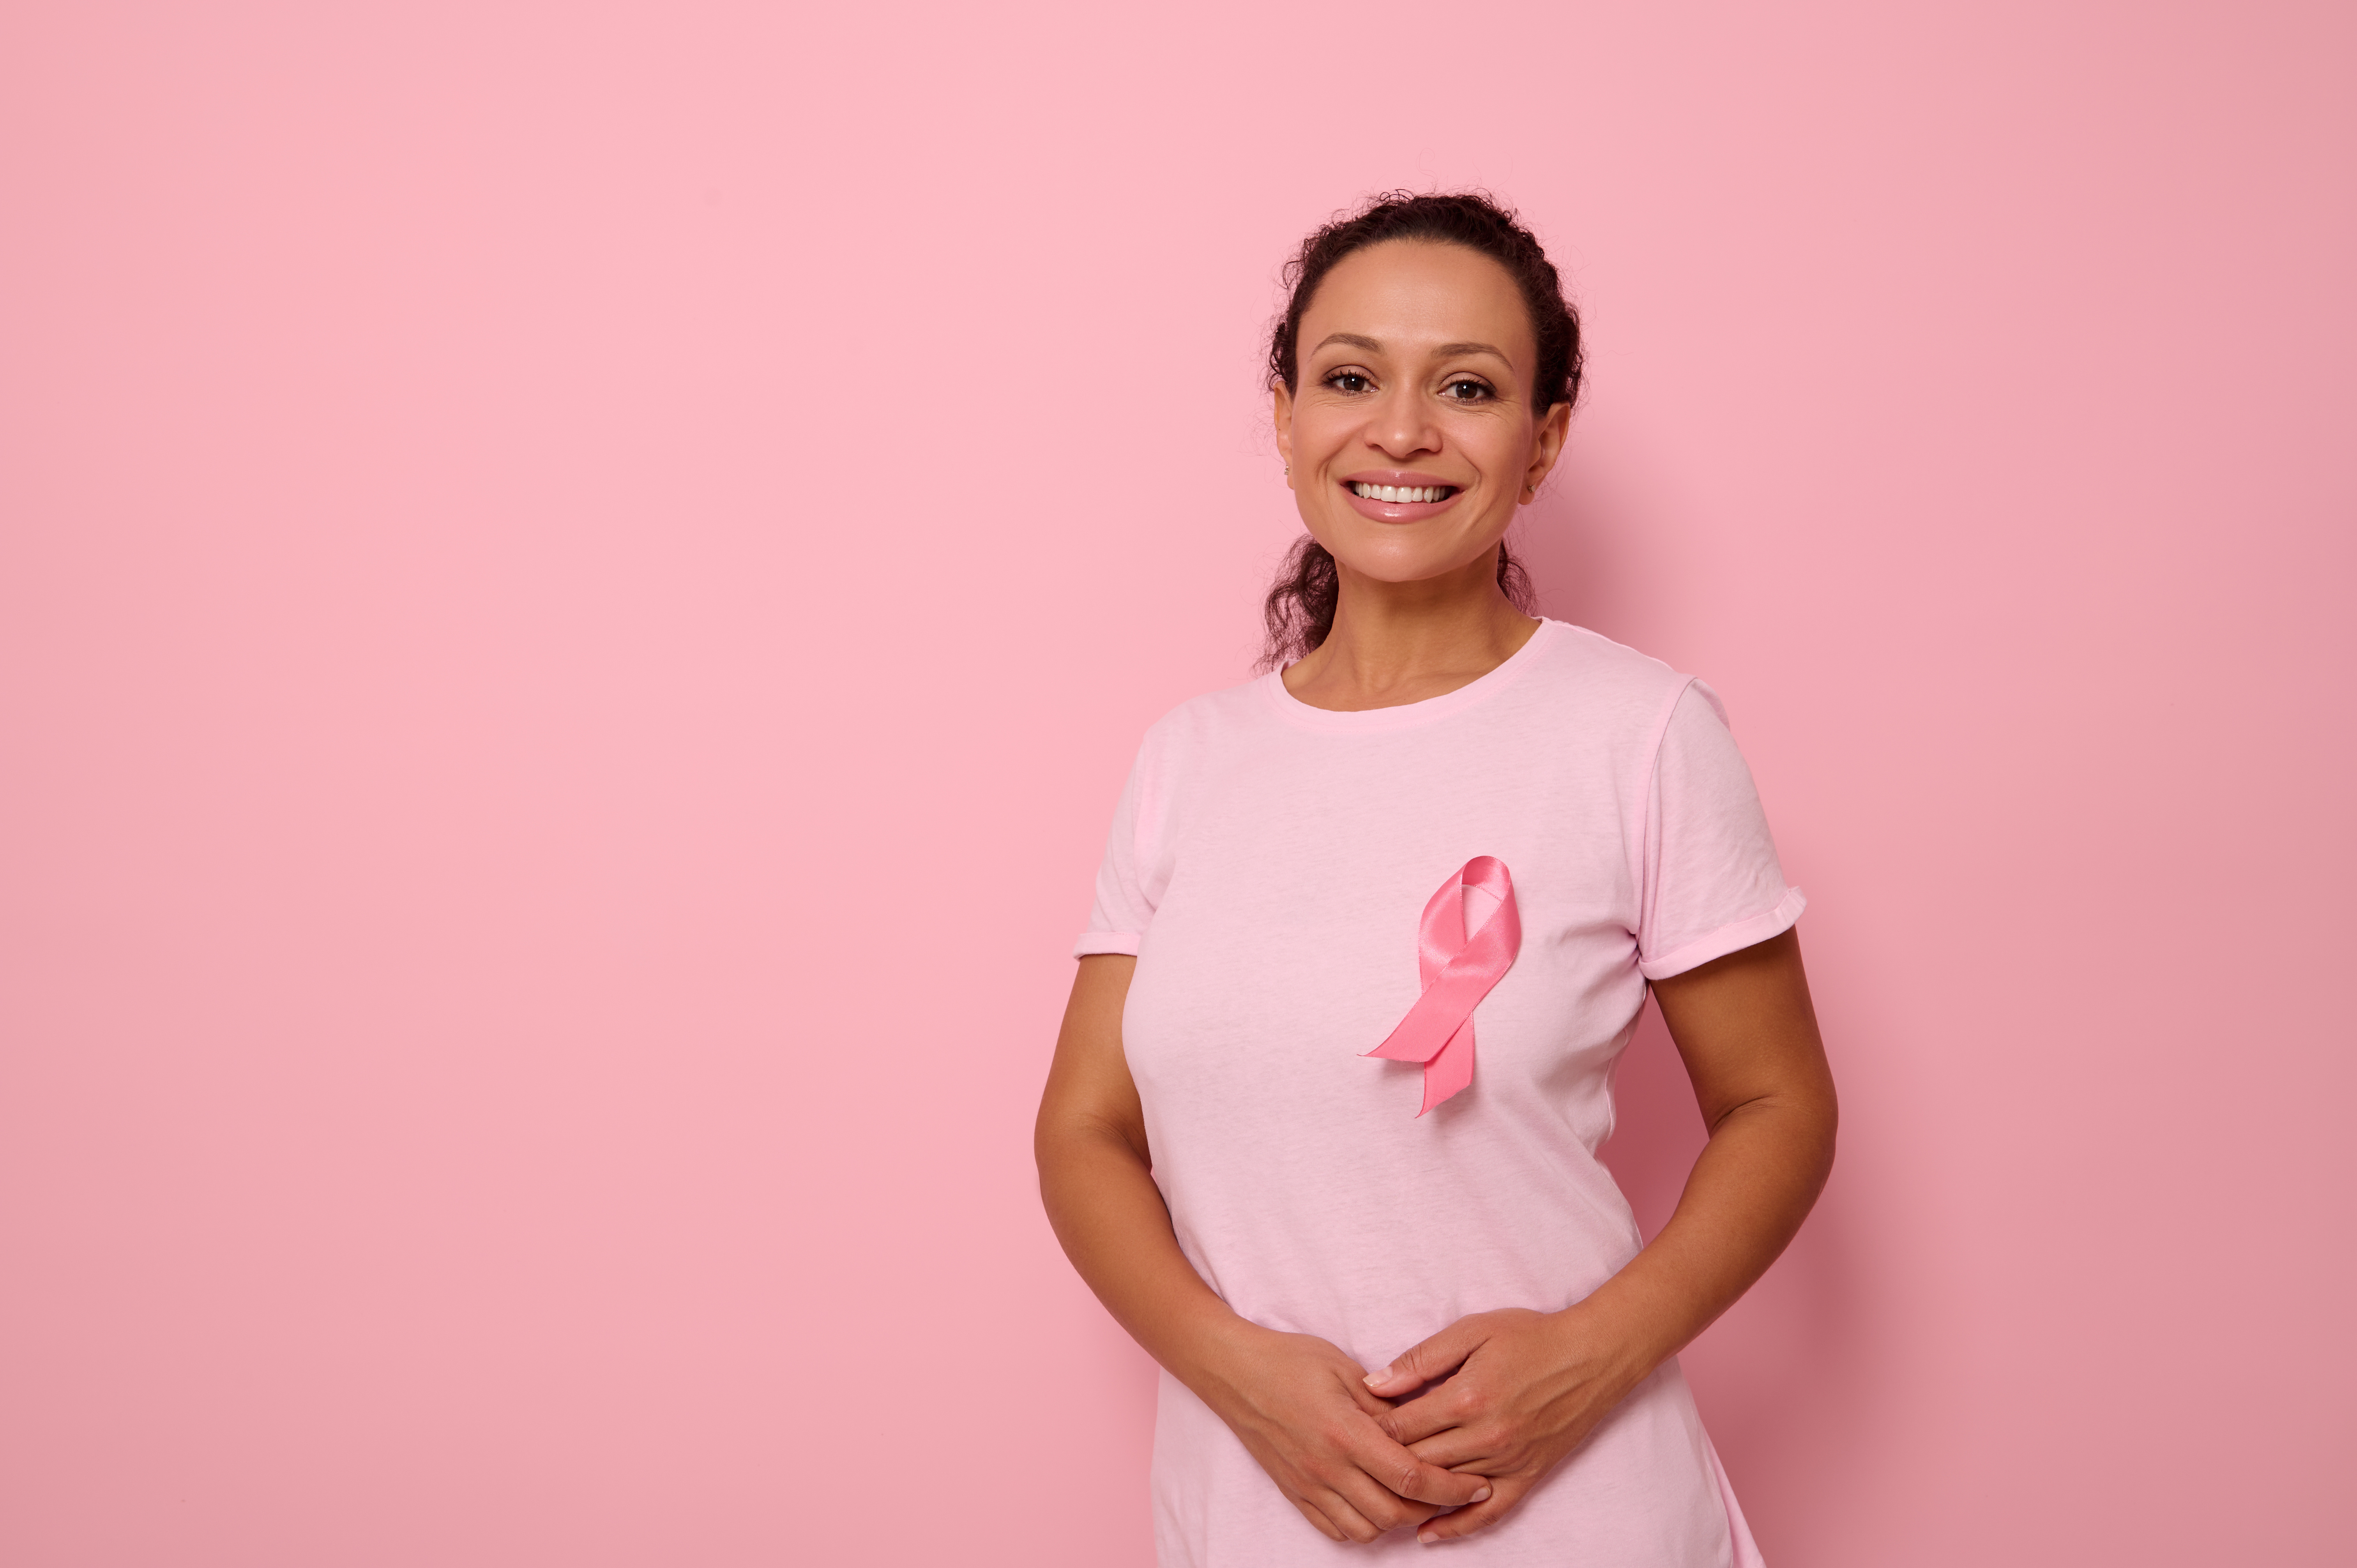 Woman smiling standing up with hands crossed wearing pink t-shirt and a breast cancer ribbon on her chest